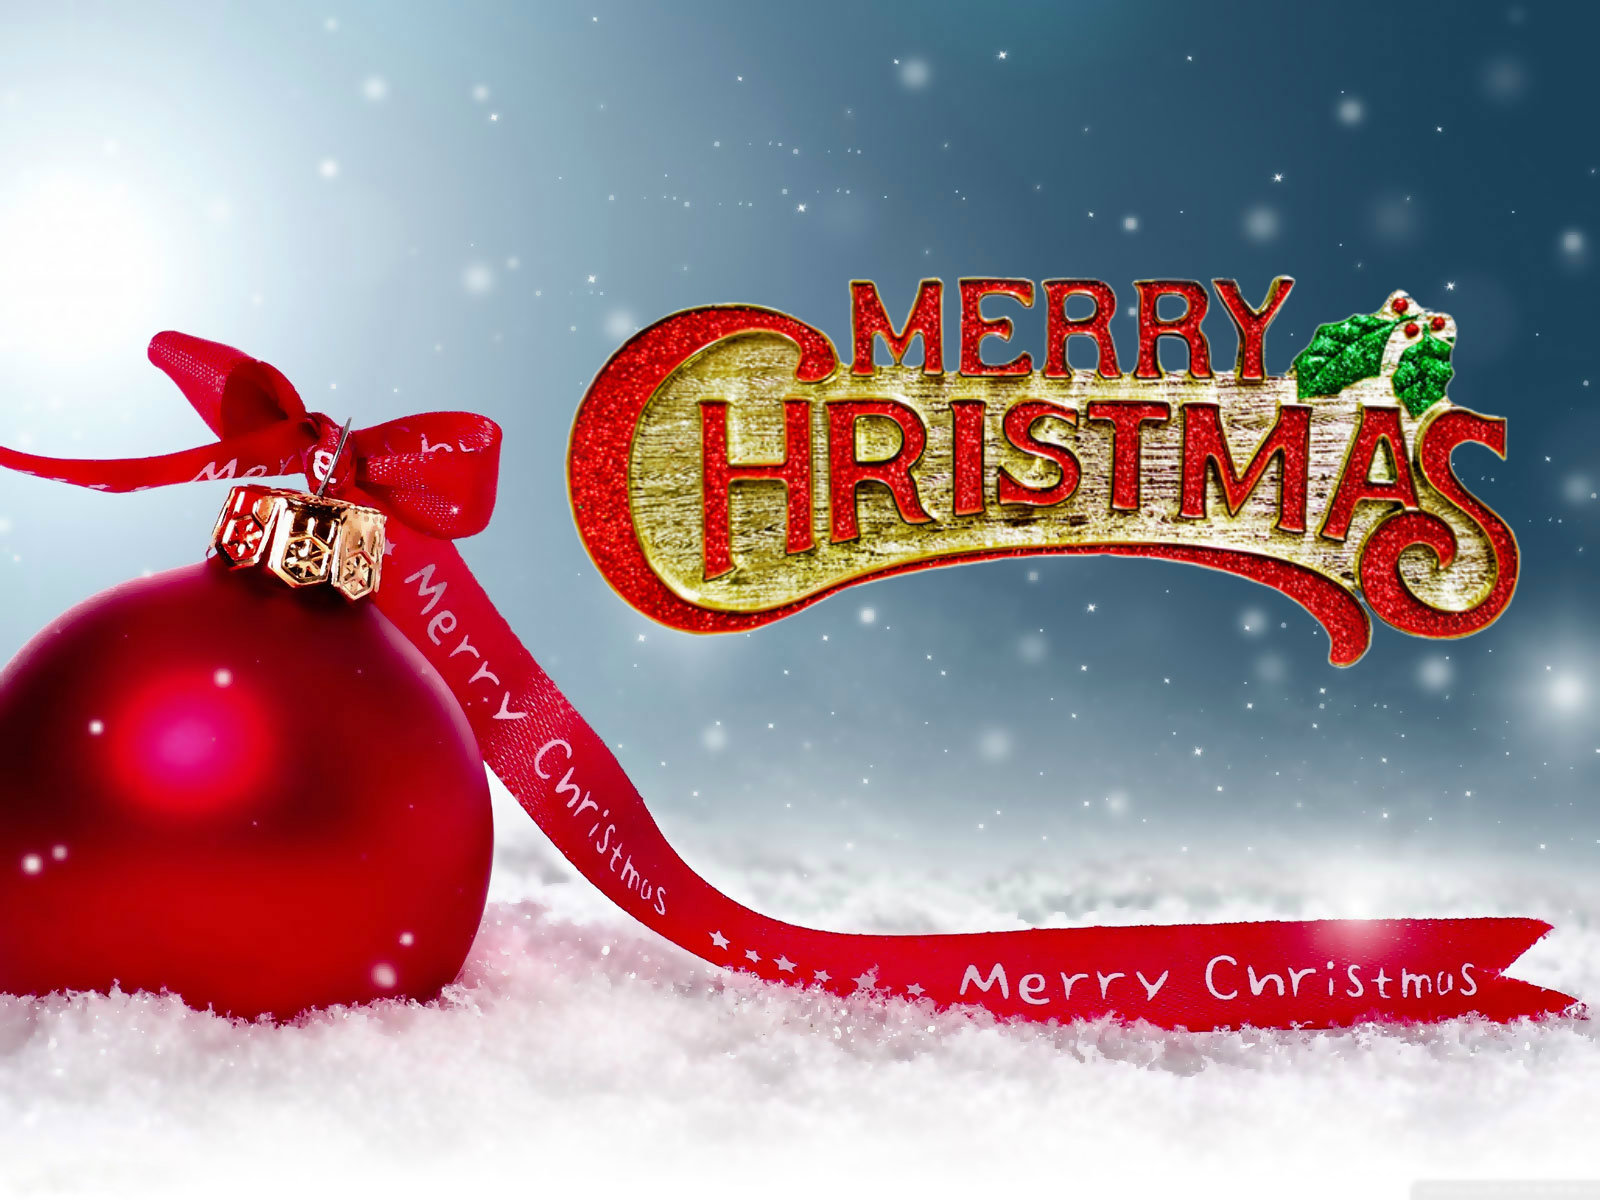 Merry Christmas Pictures 2020 | Christmas Images Hd Photos